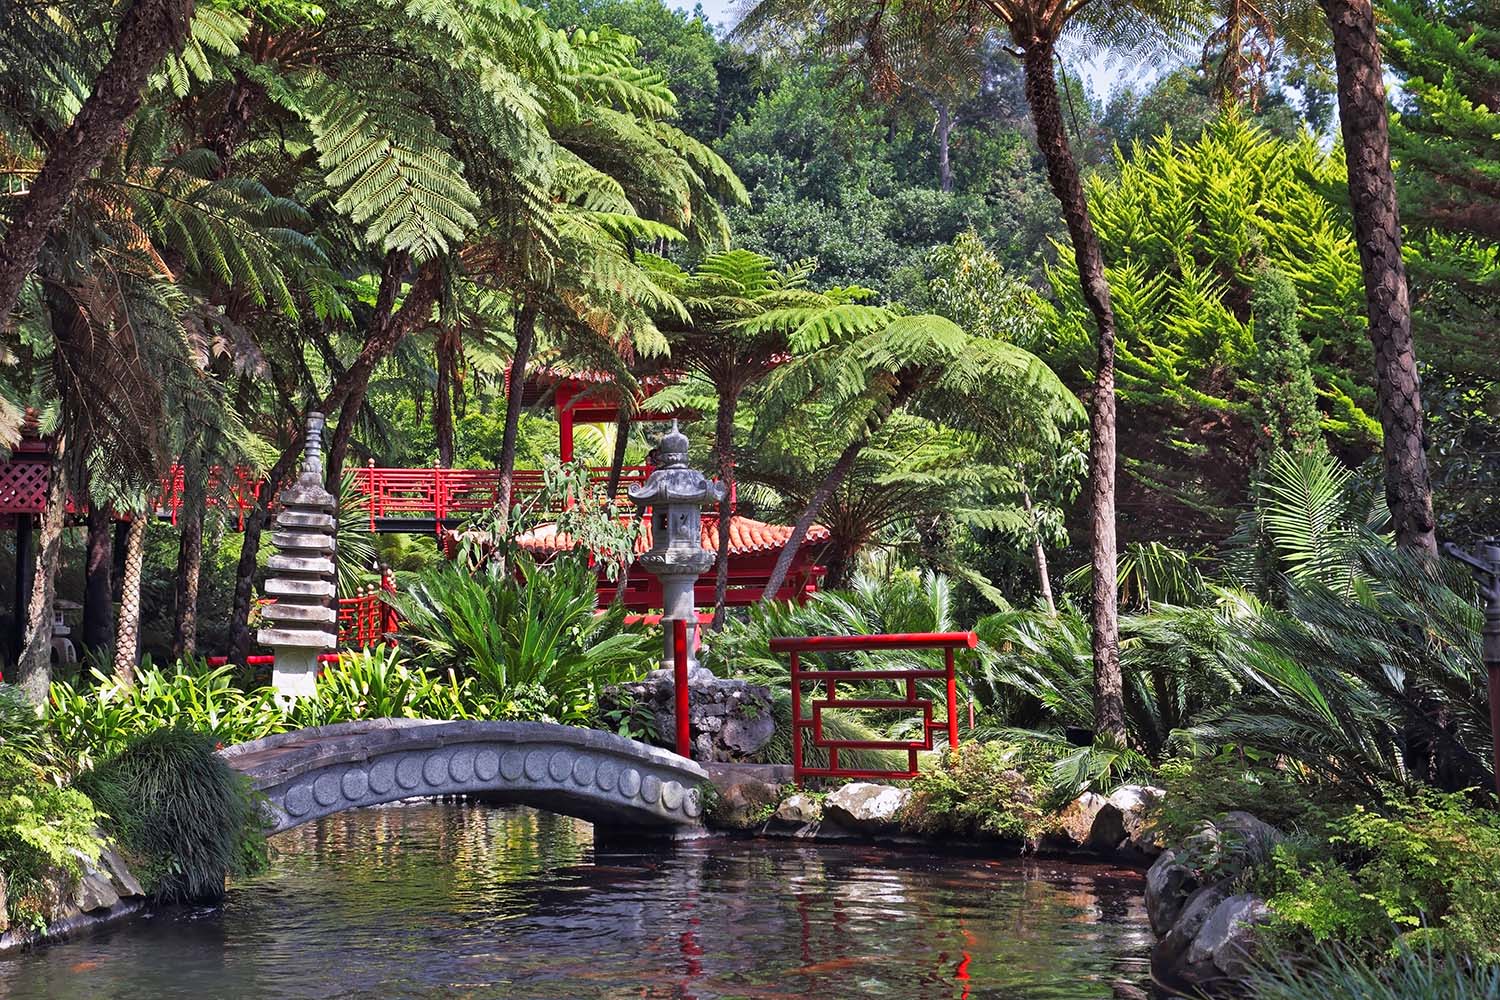  Chinese-style pavilions and a wonderful bridge over a pond with goldfish. Lovely park on the island of Madeira -  Monte Palace Tropical Garden